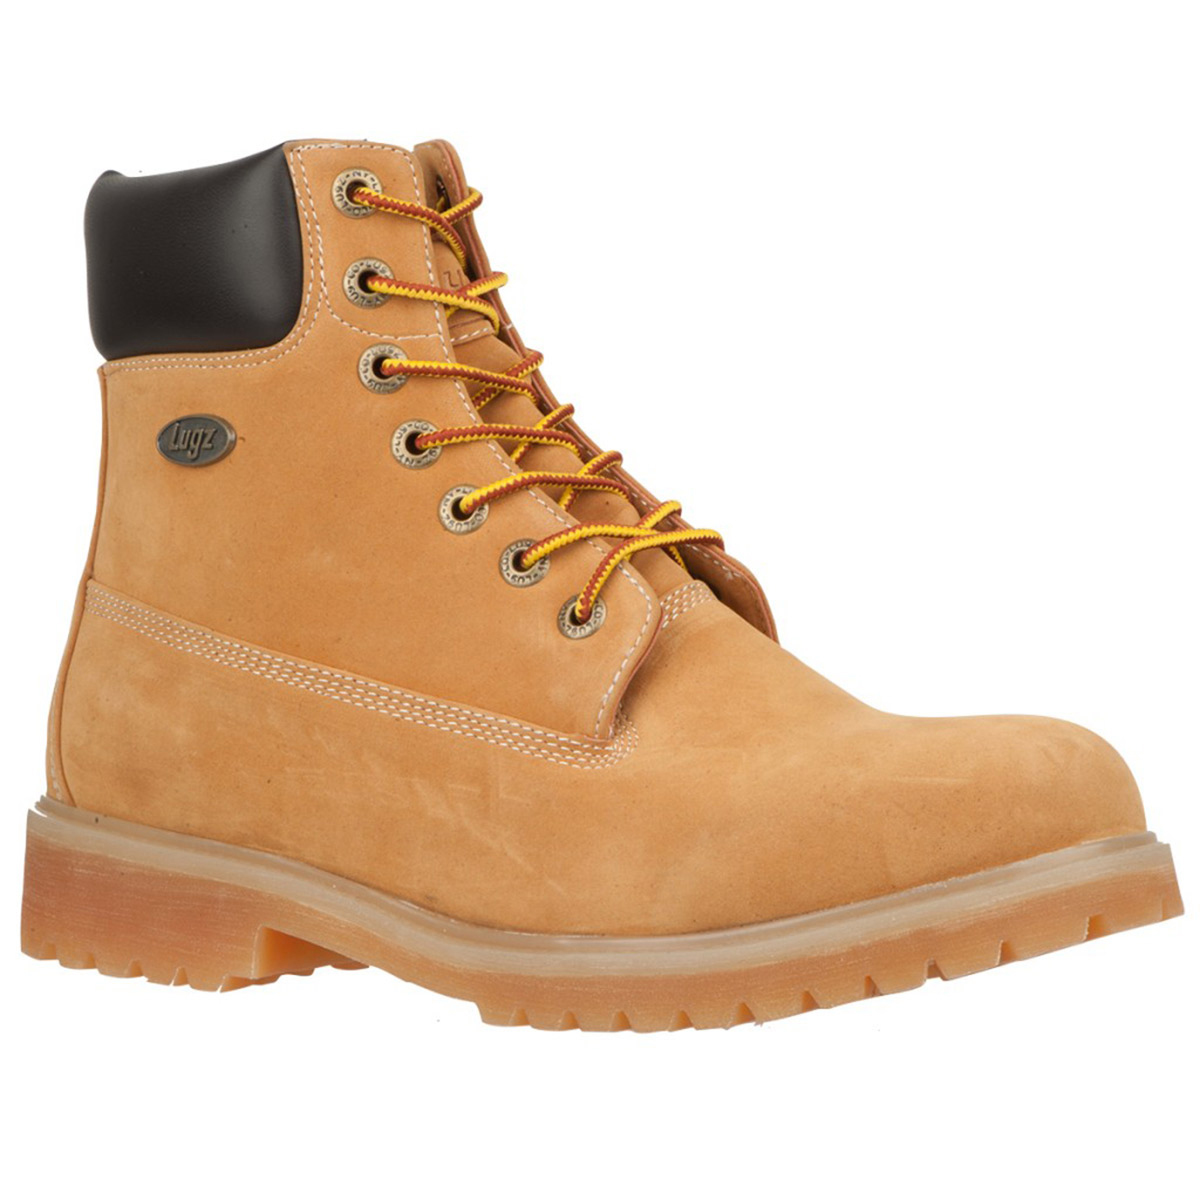 Lugz boots lugz menu0026rsquo;s convoy water-resistant boots - wheat NMEUMJO